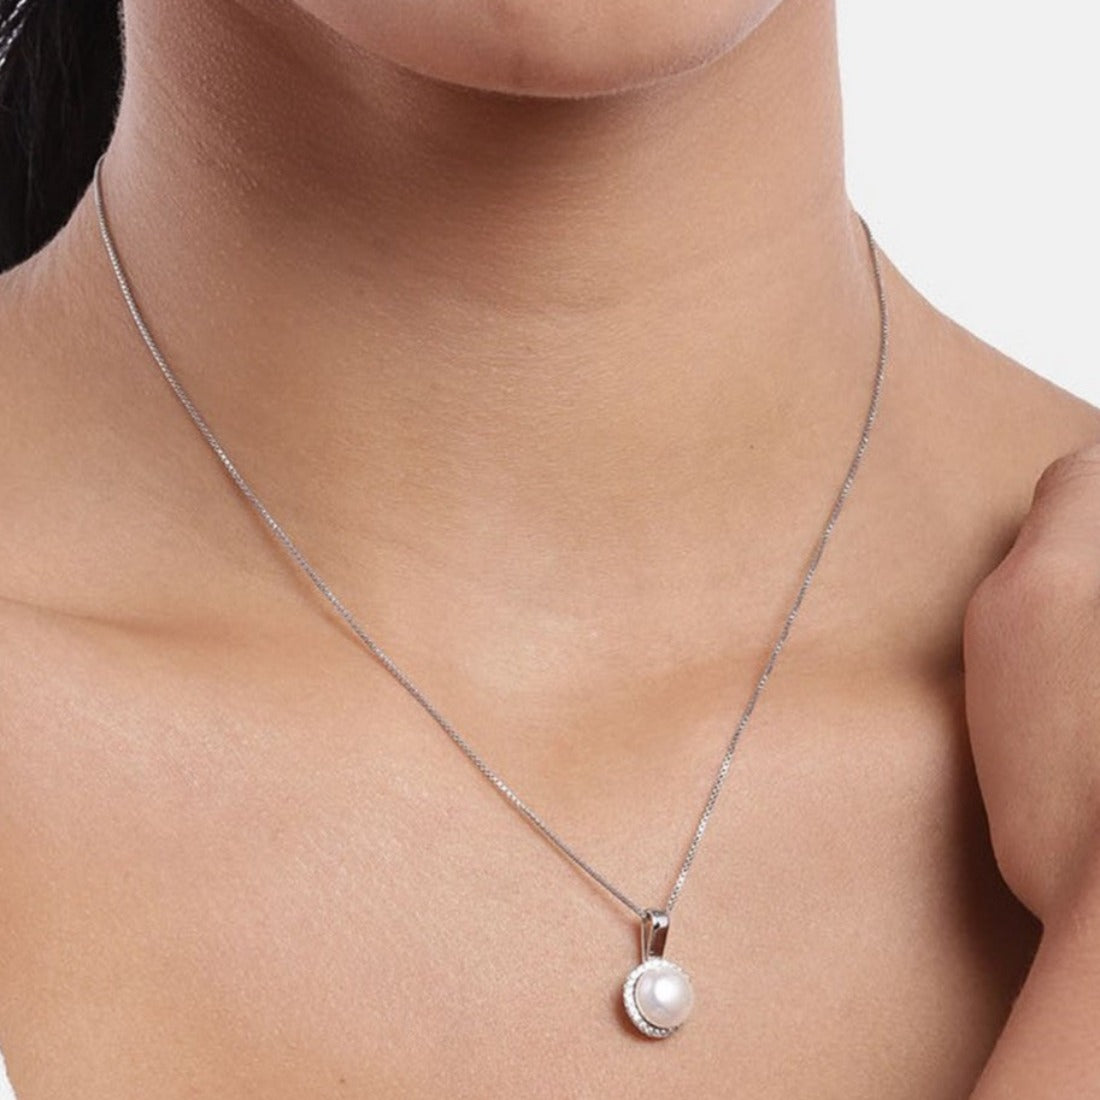 Freshwater Pearl 925 Sterling Silver Pendant with Chain